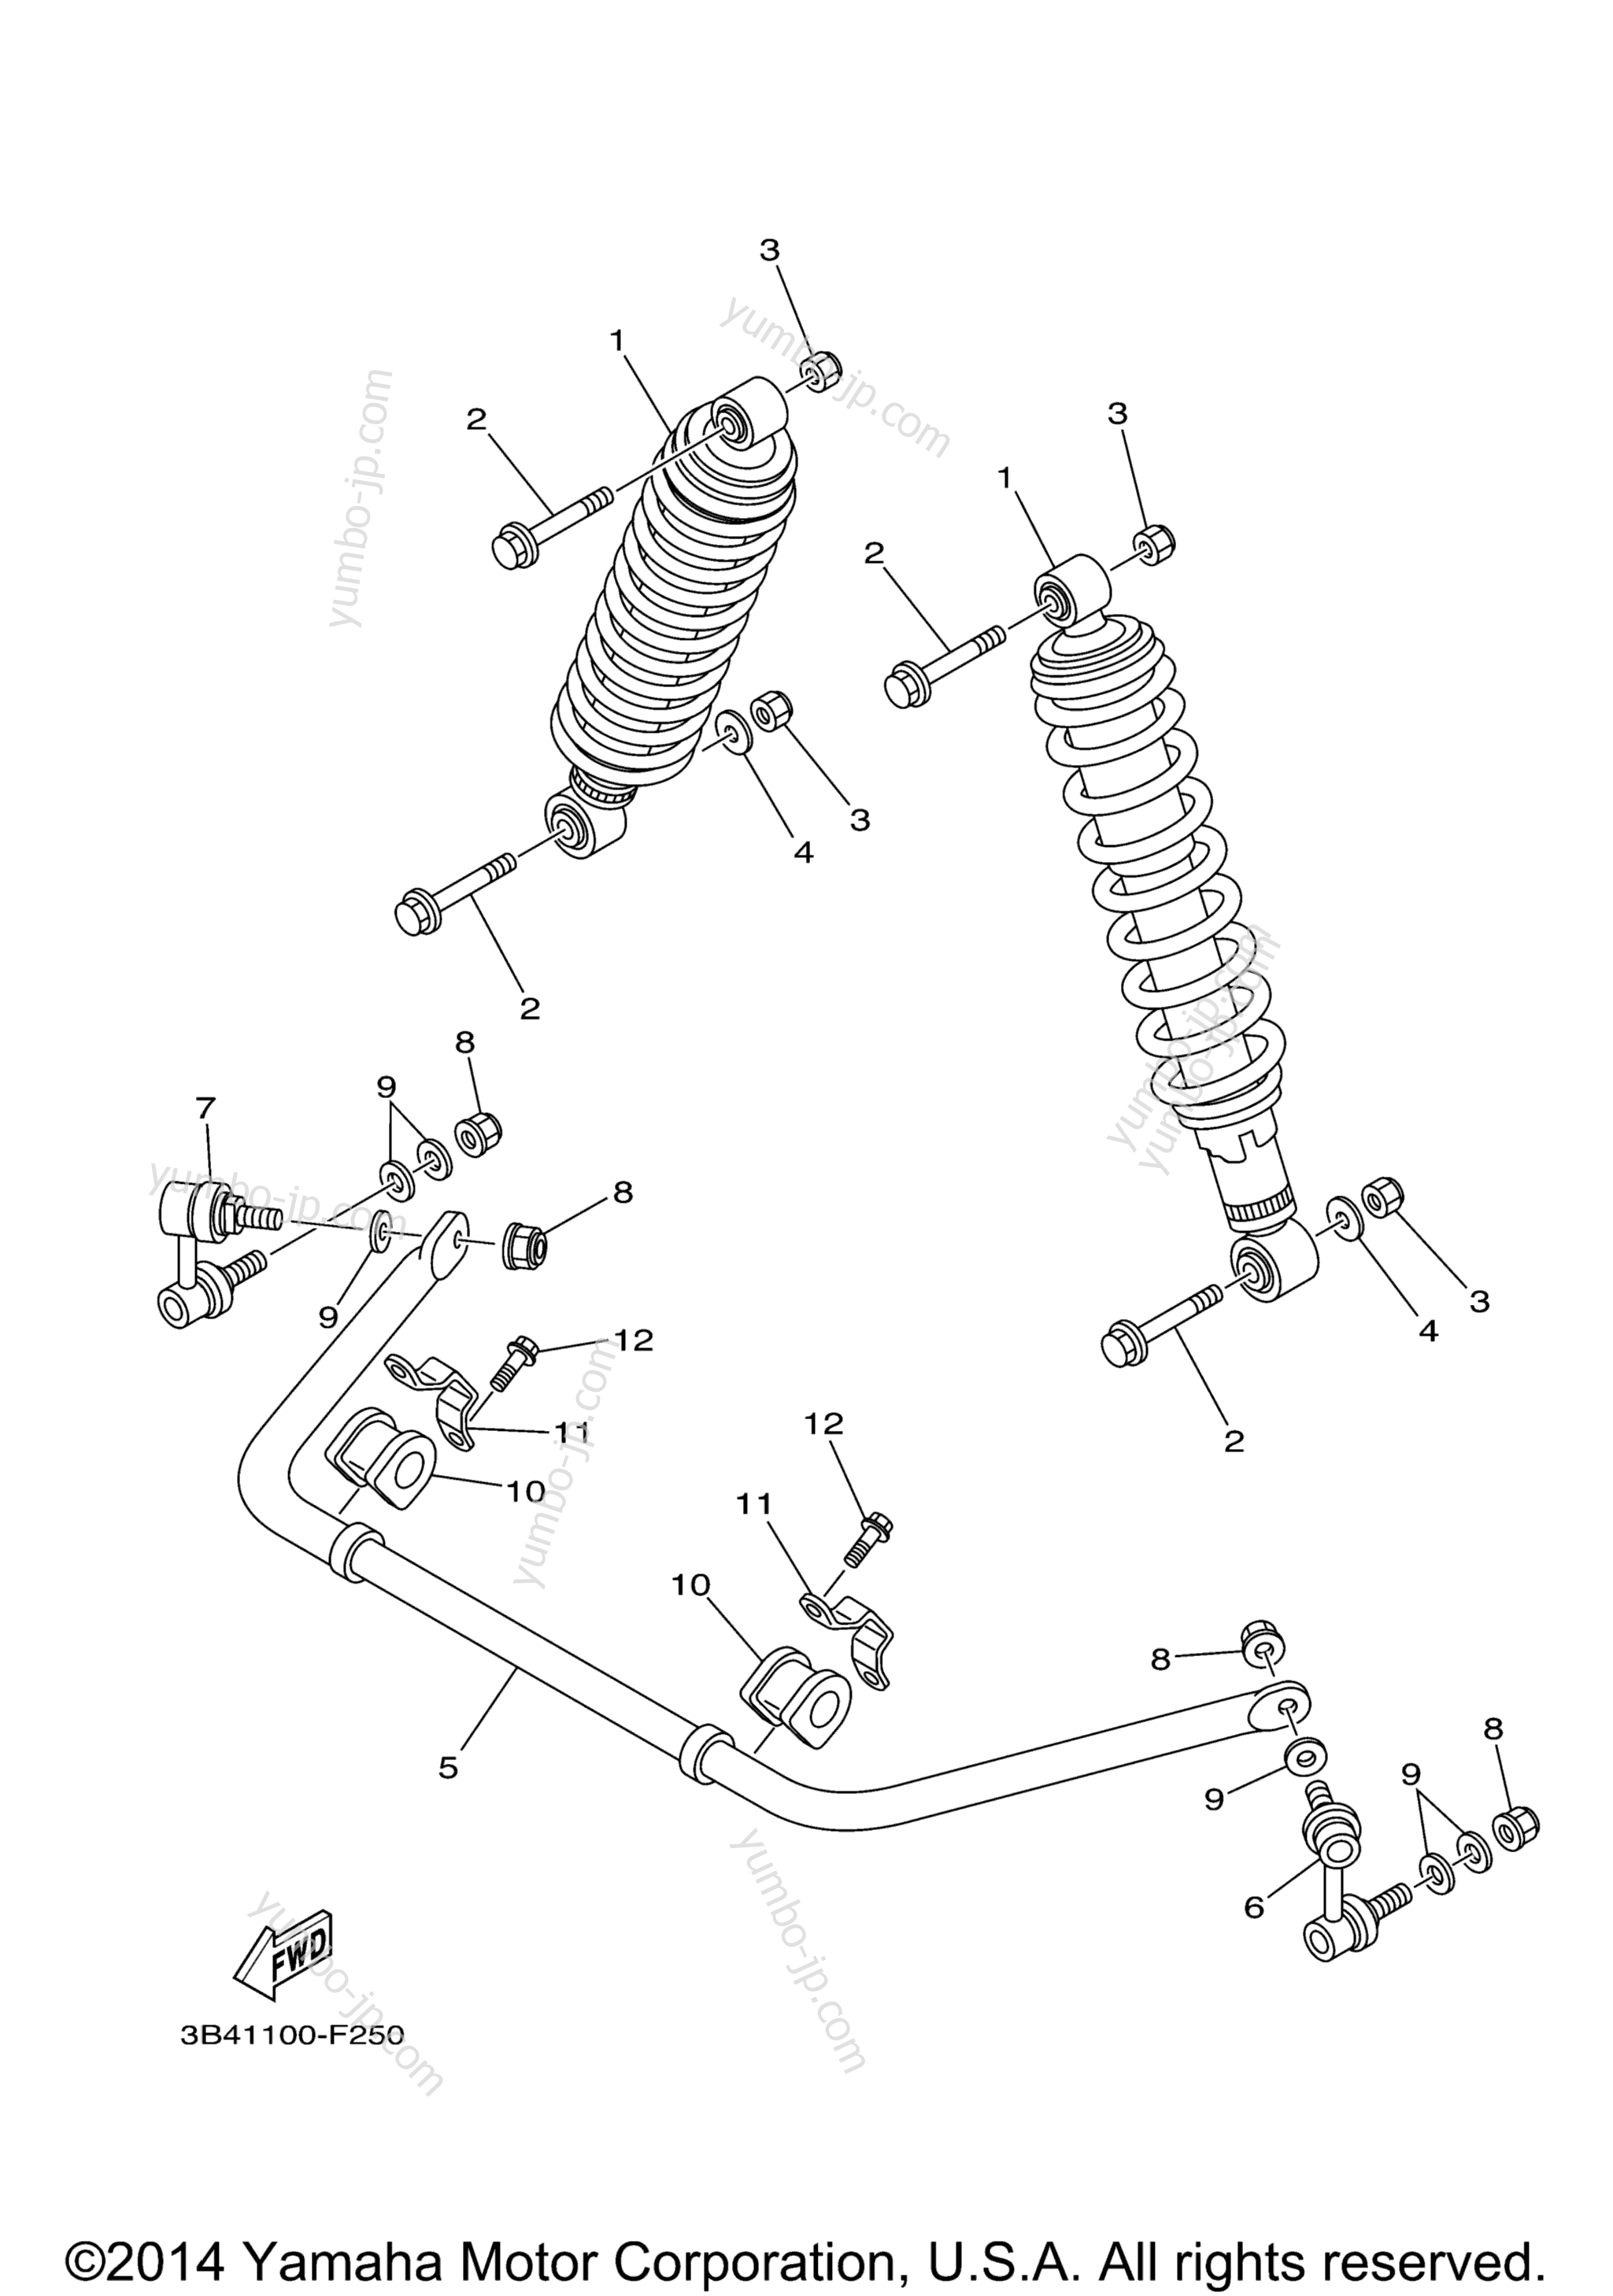 Rear Suspension for ATVs YAMAHA GRIZZLY 550 FI 4WD (YFM5FGZGR) 2010 year